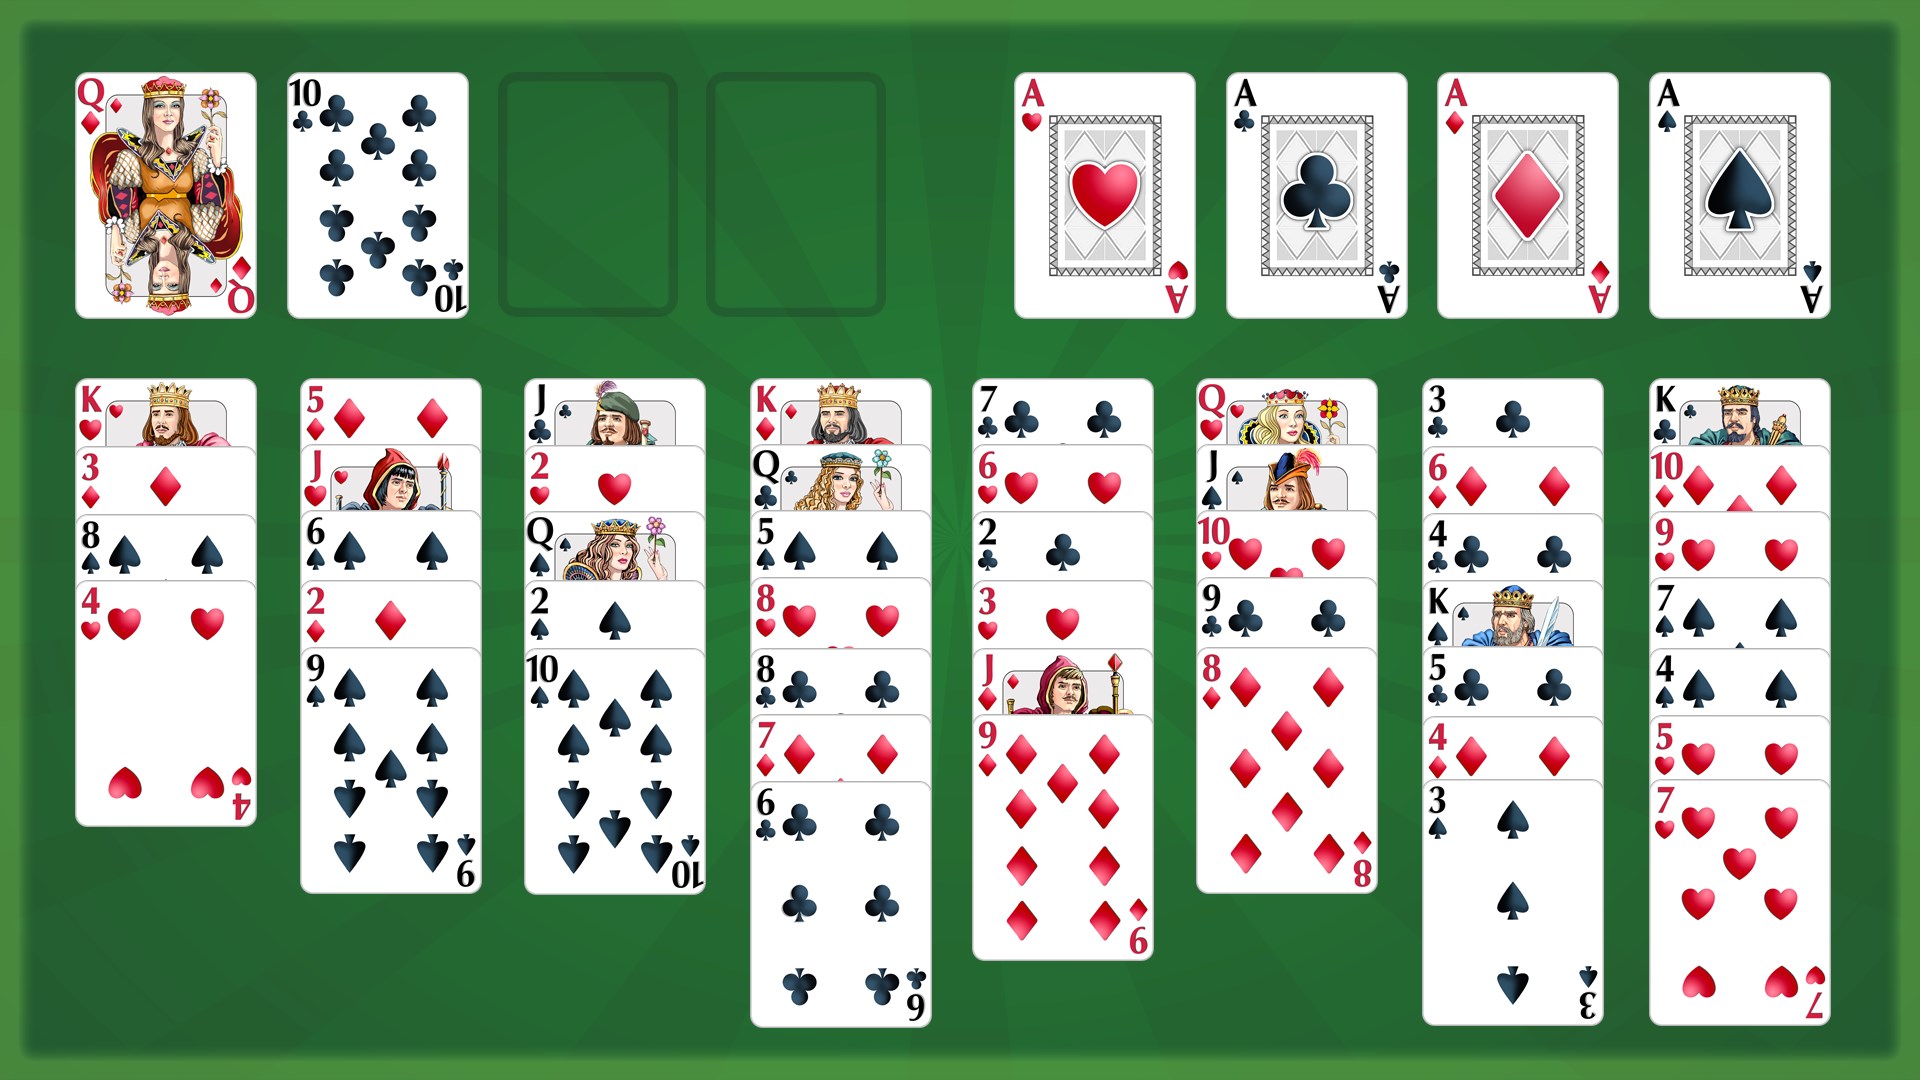 FreeCell Solitaire Classic Free